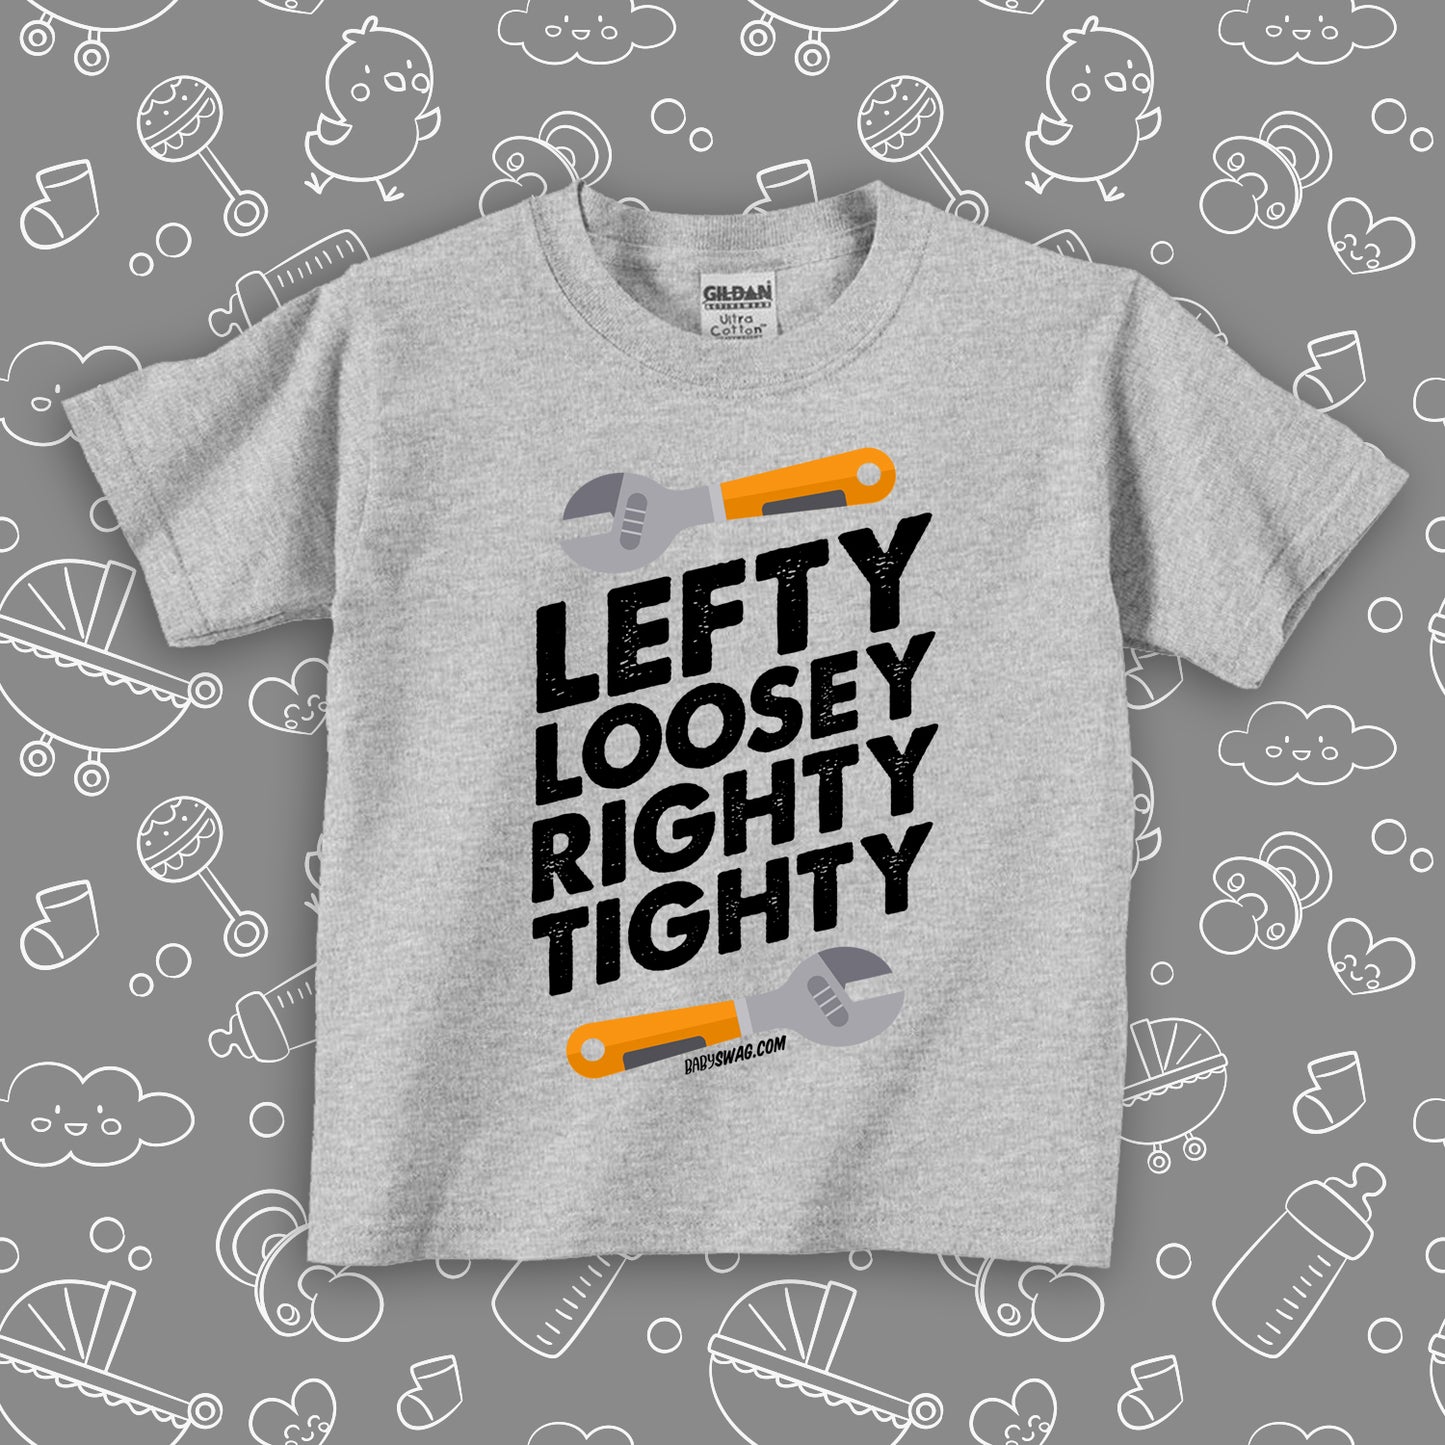 Toddler boy graphic tee with saying "Lefty Loosey Righty Tighty" in grey.  